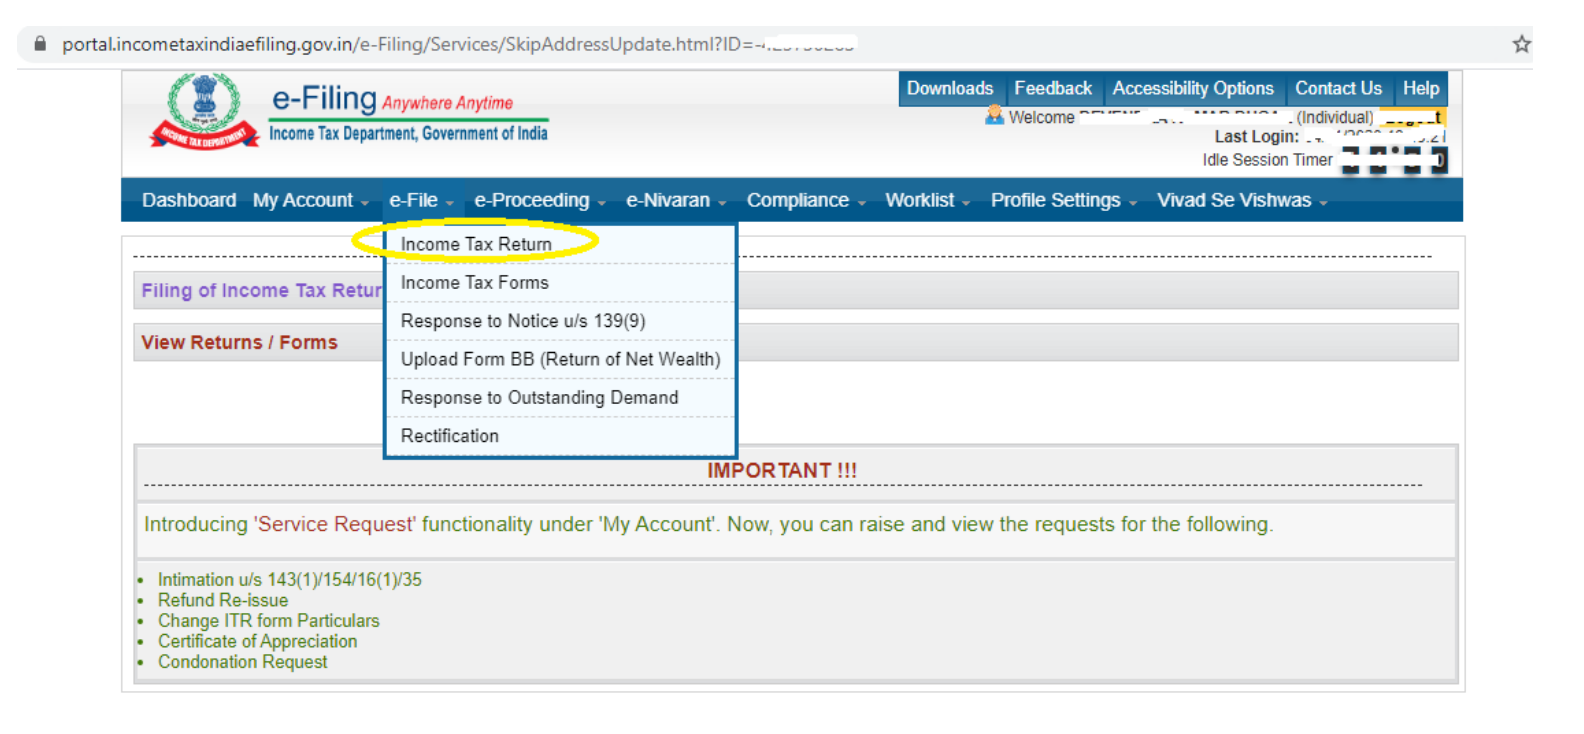 Visit the Official Income Tax Portal